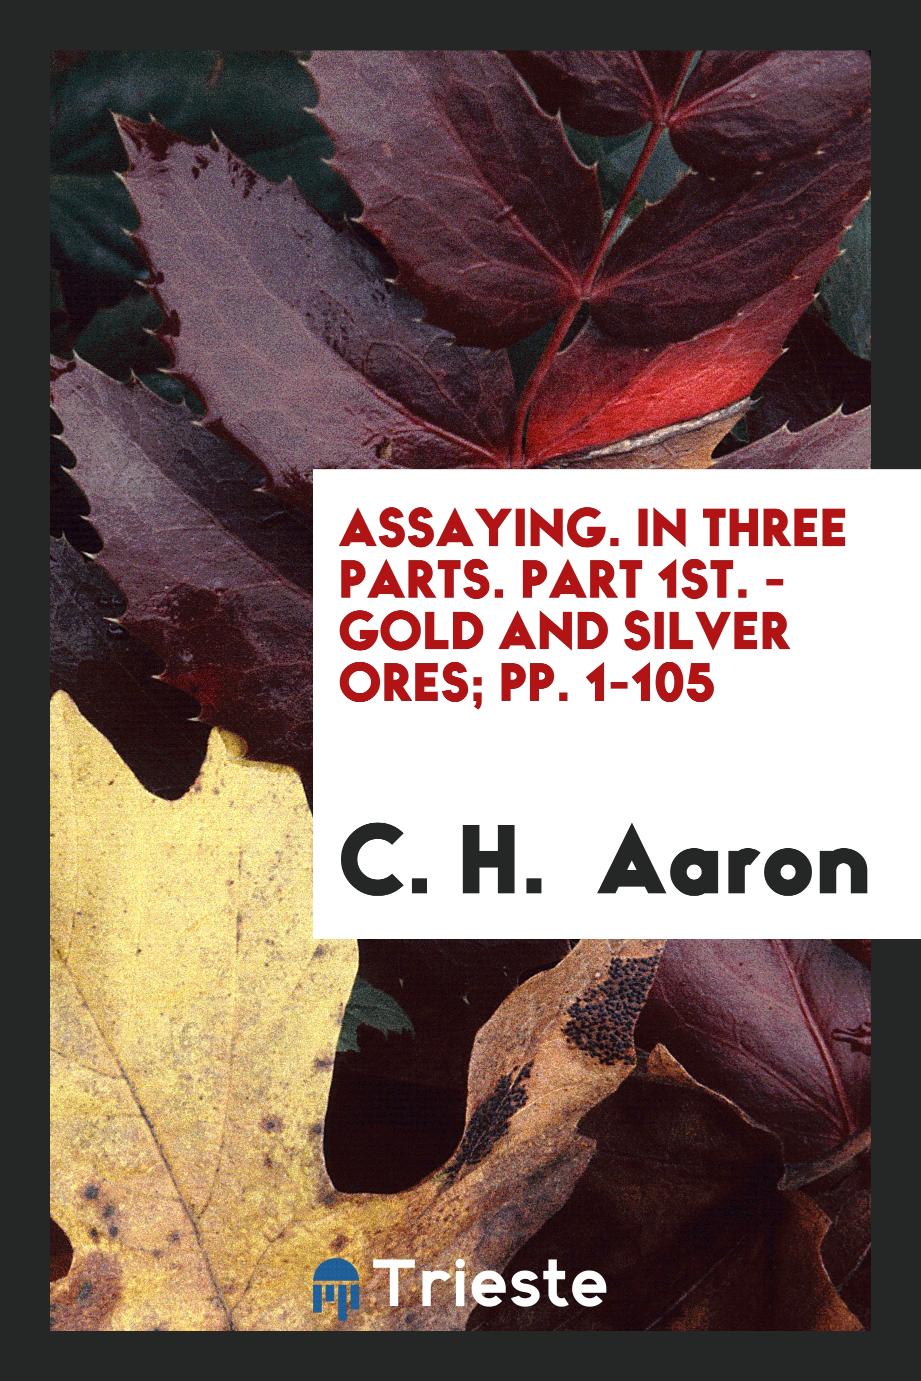 Assaying. In Three Parts. Part 1st. - Gold and Silver Ores; pp. 1-105